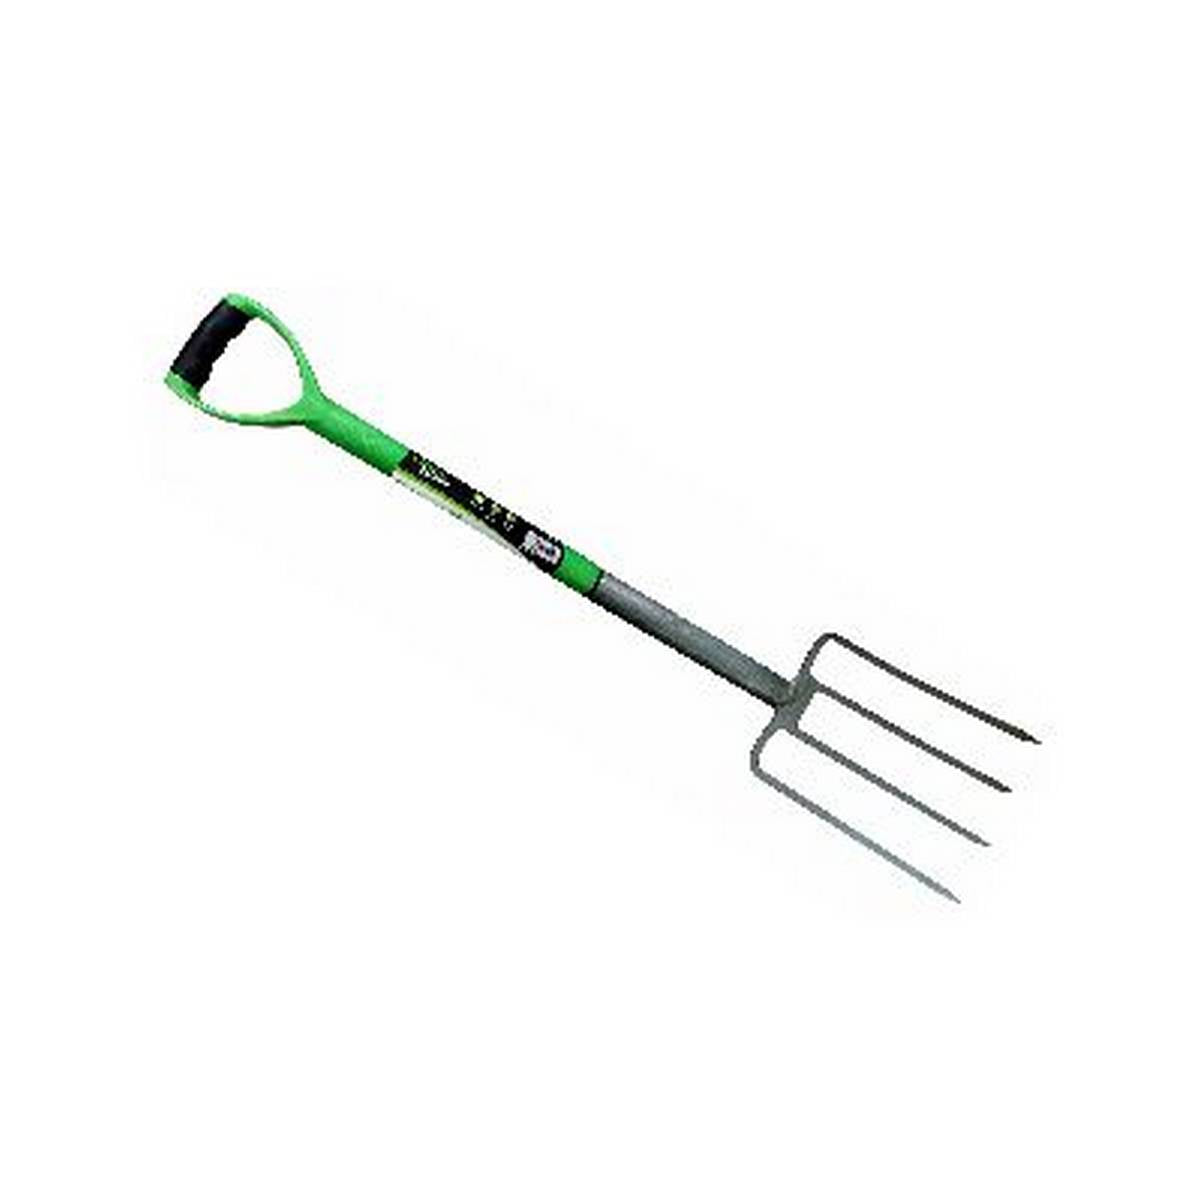 GREENBLADE GREEN BLADE DIGGING FORK WITH PLASTIC COATED STEEL SHAFT BB-GF100